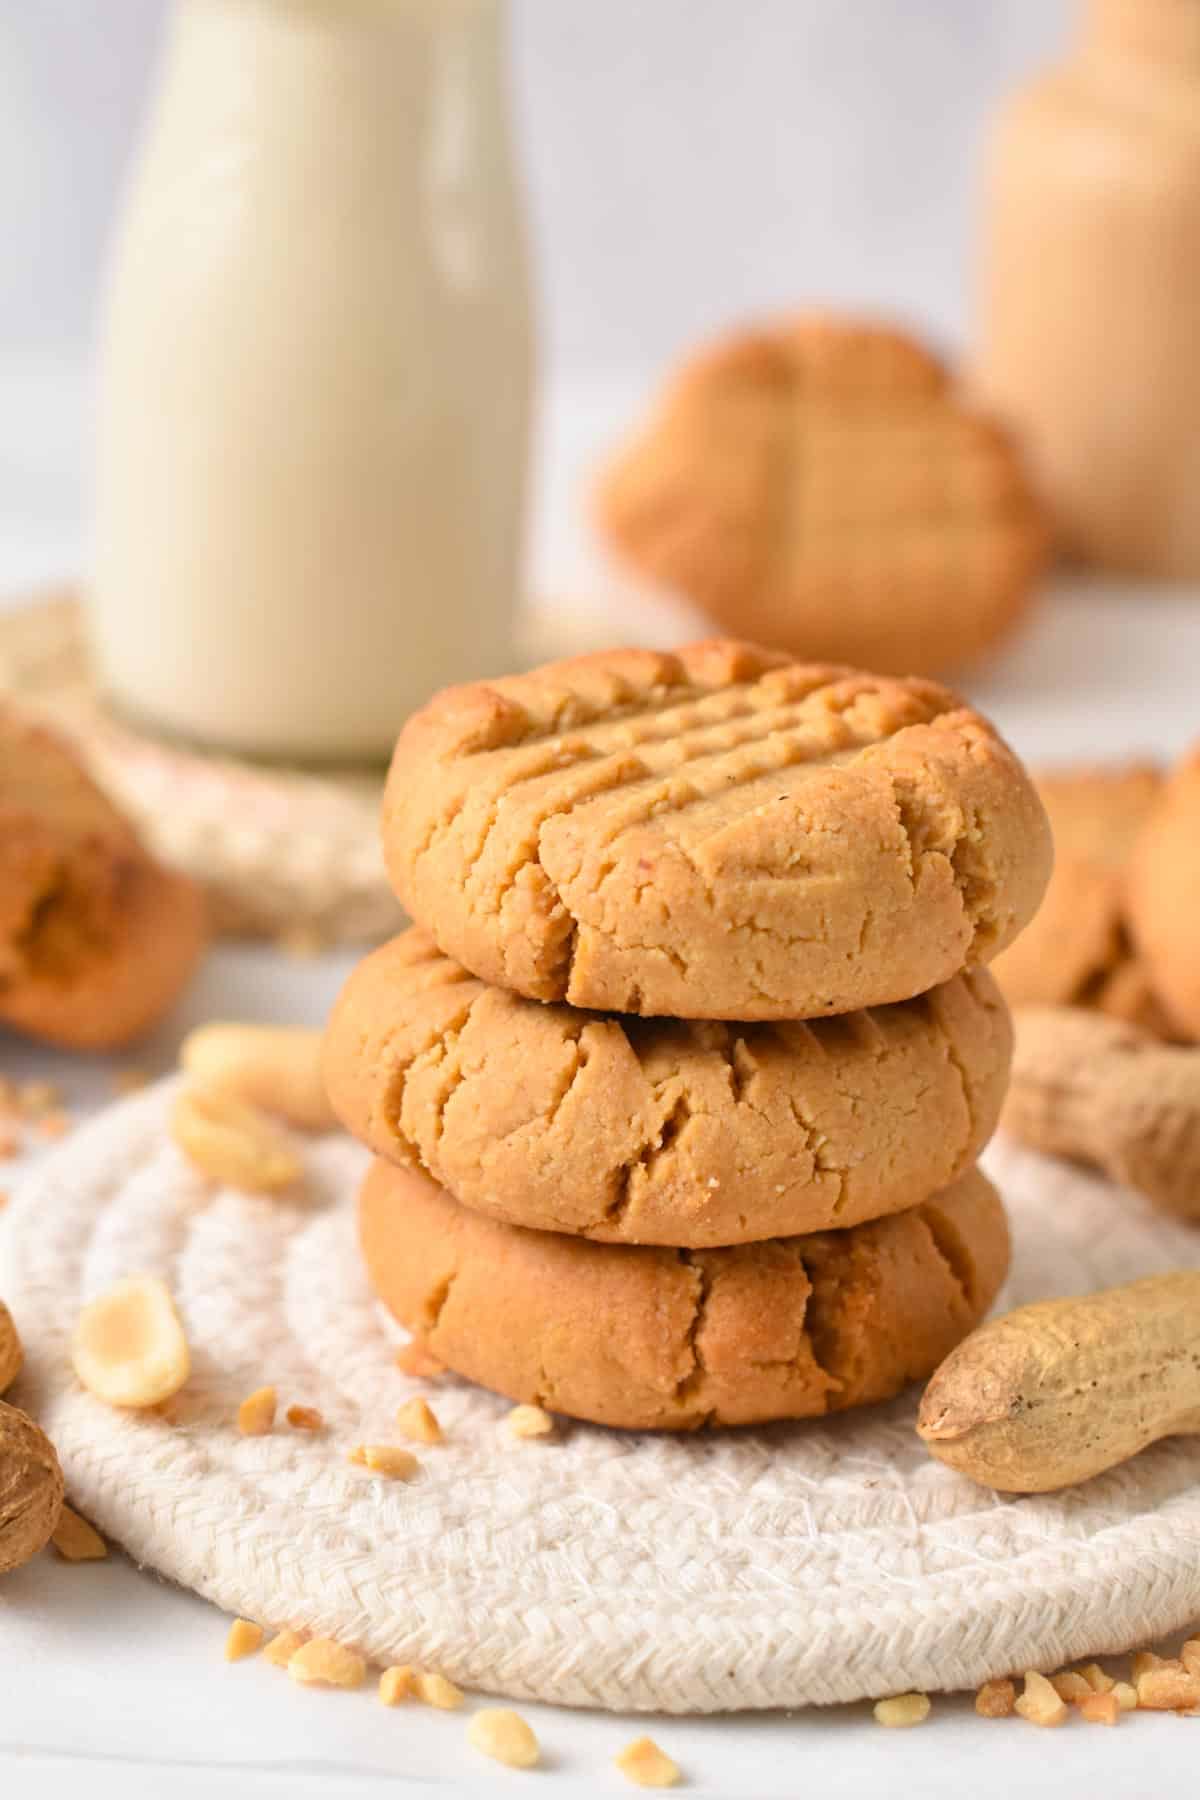 A stack of 3 Almond Flour Peanut Butter Cookies with one broken cookie on top showing the crunchy cookie texture.